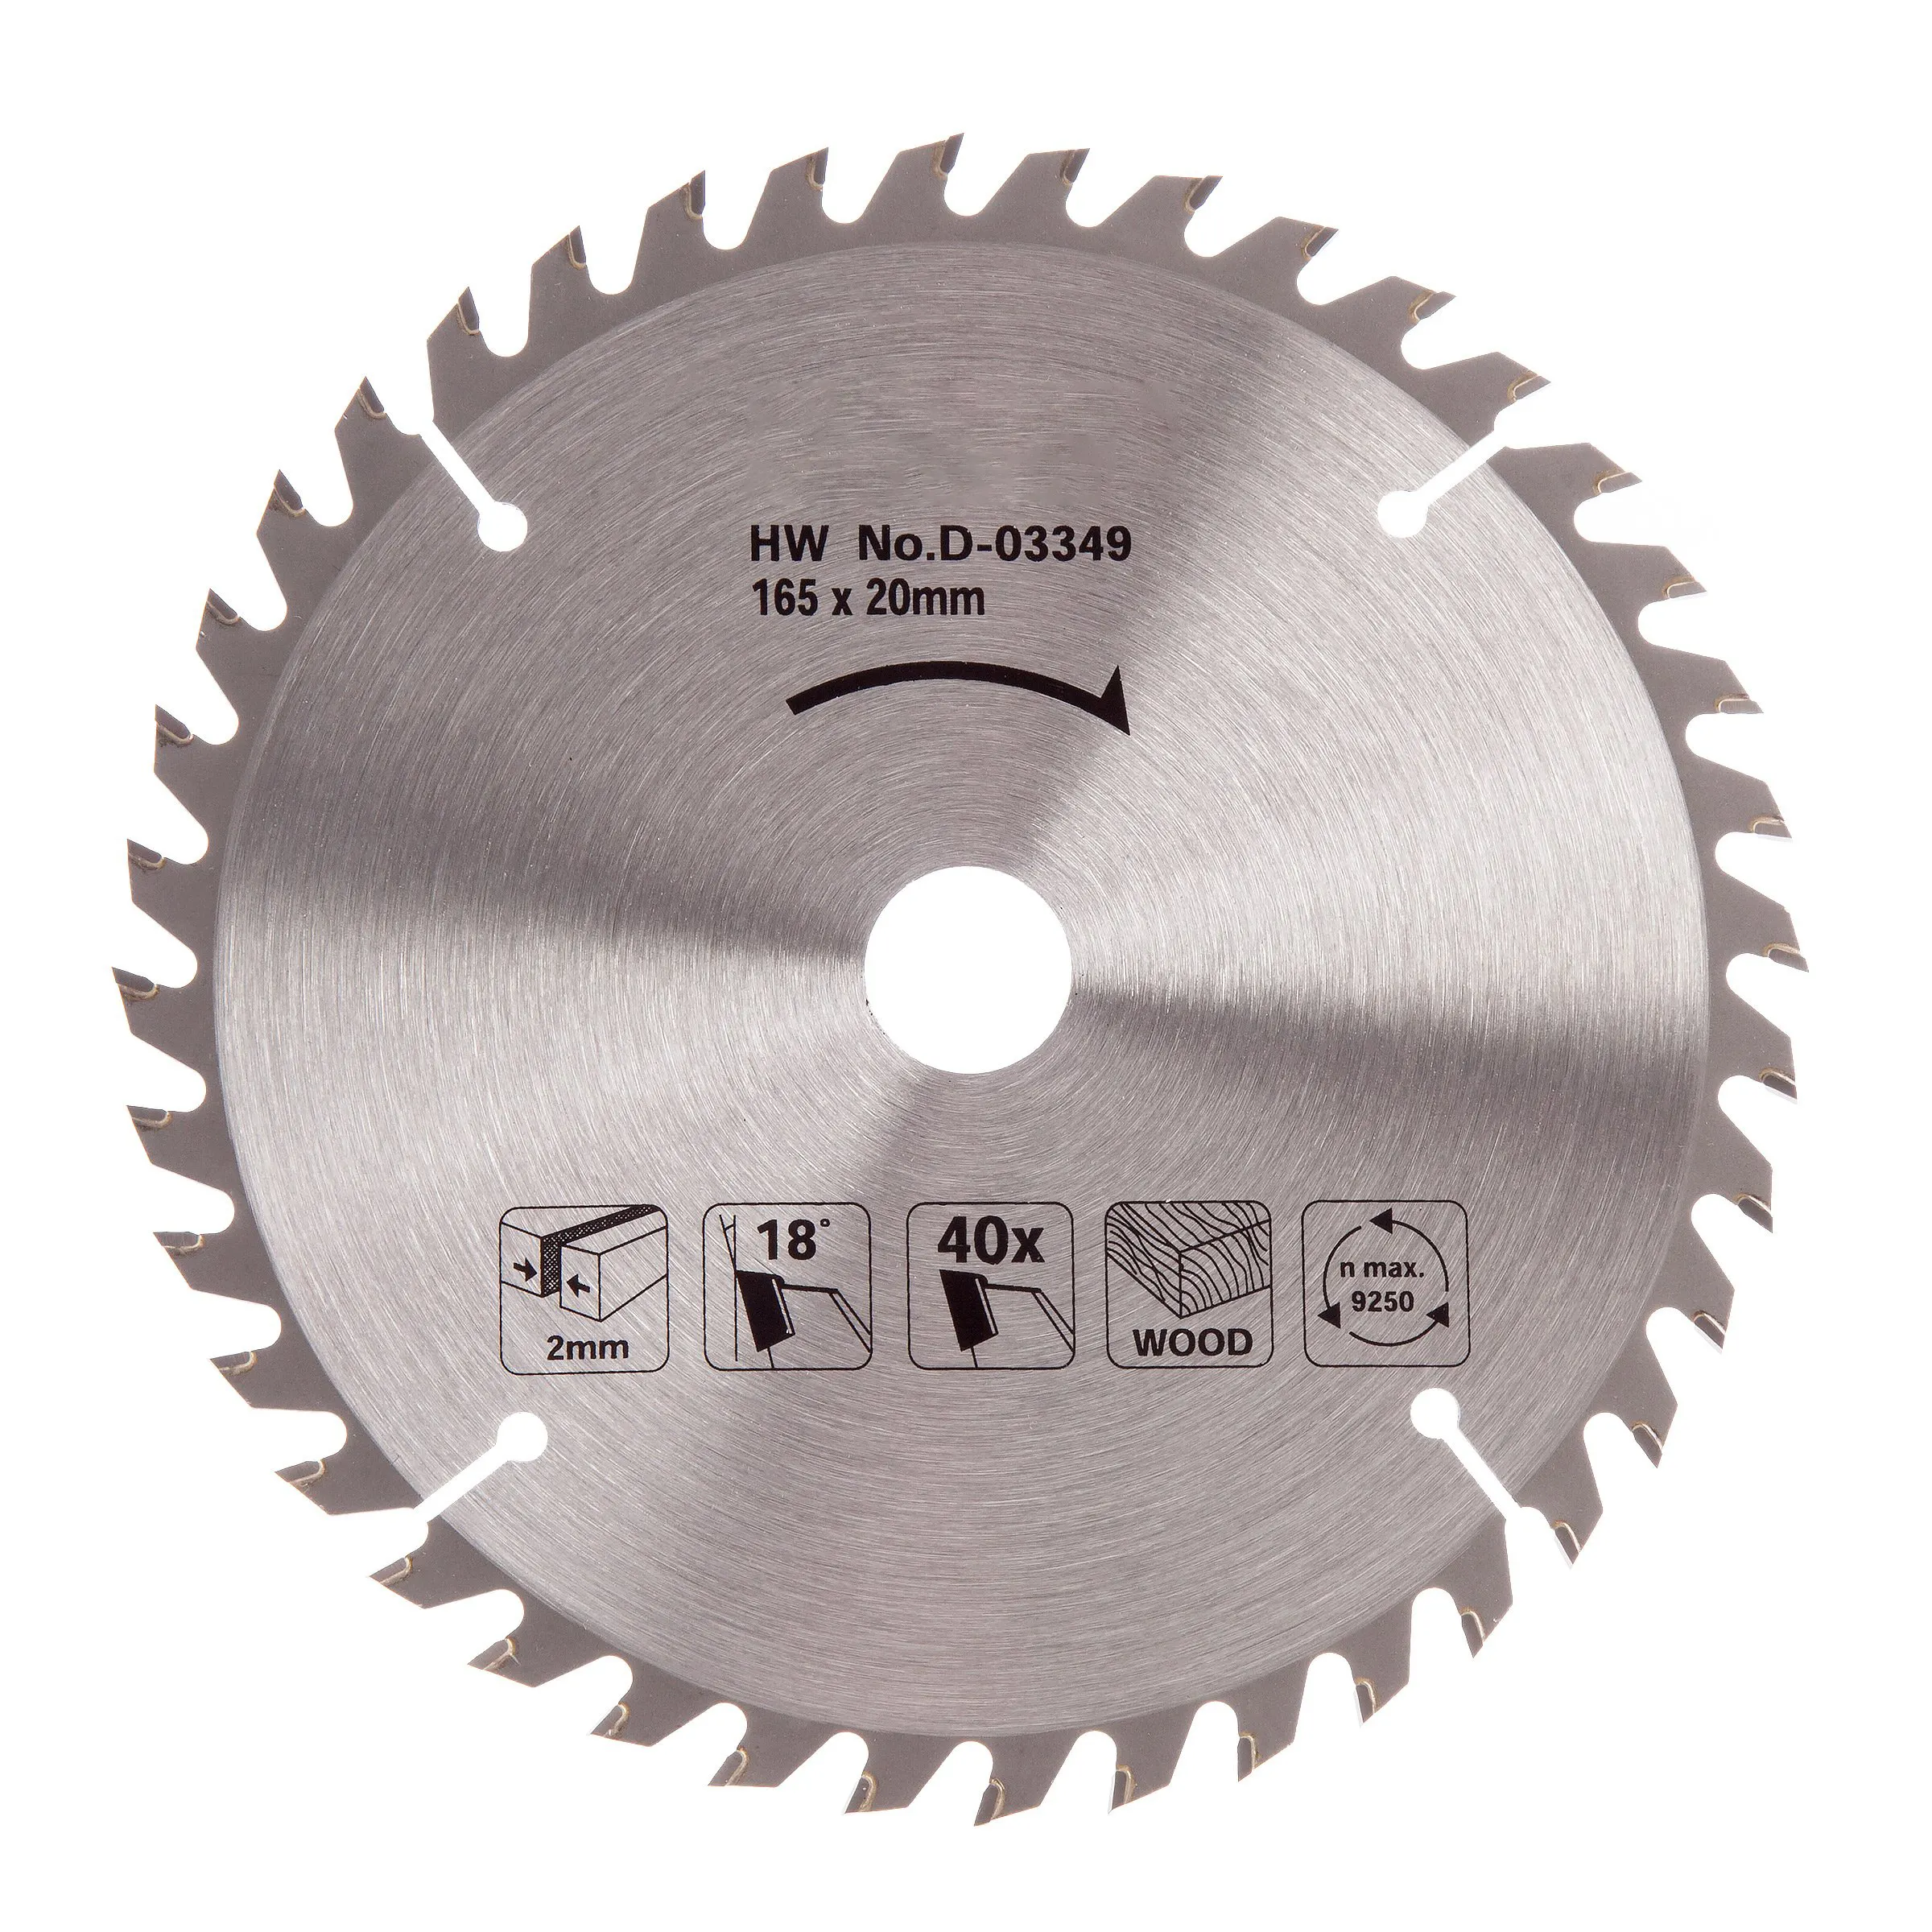 Dia 4 Inch 100mm Wood Saw Blade Disc Bore Diameter 16/20mm Wheel Cutting Disc For Woodworking Rotary Cutting Tool Saw Blade